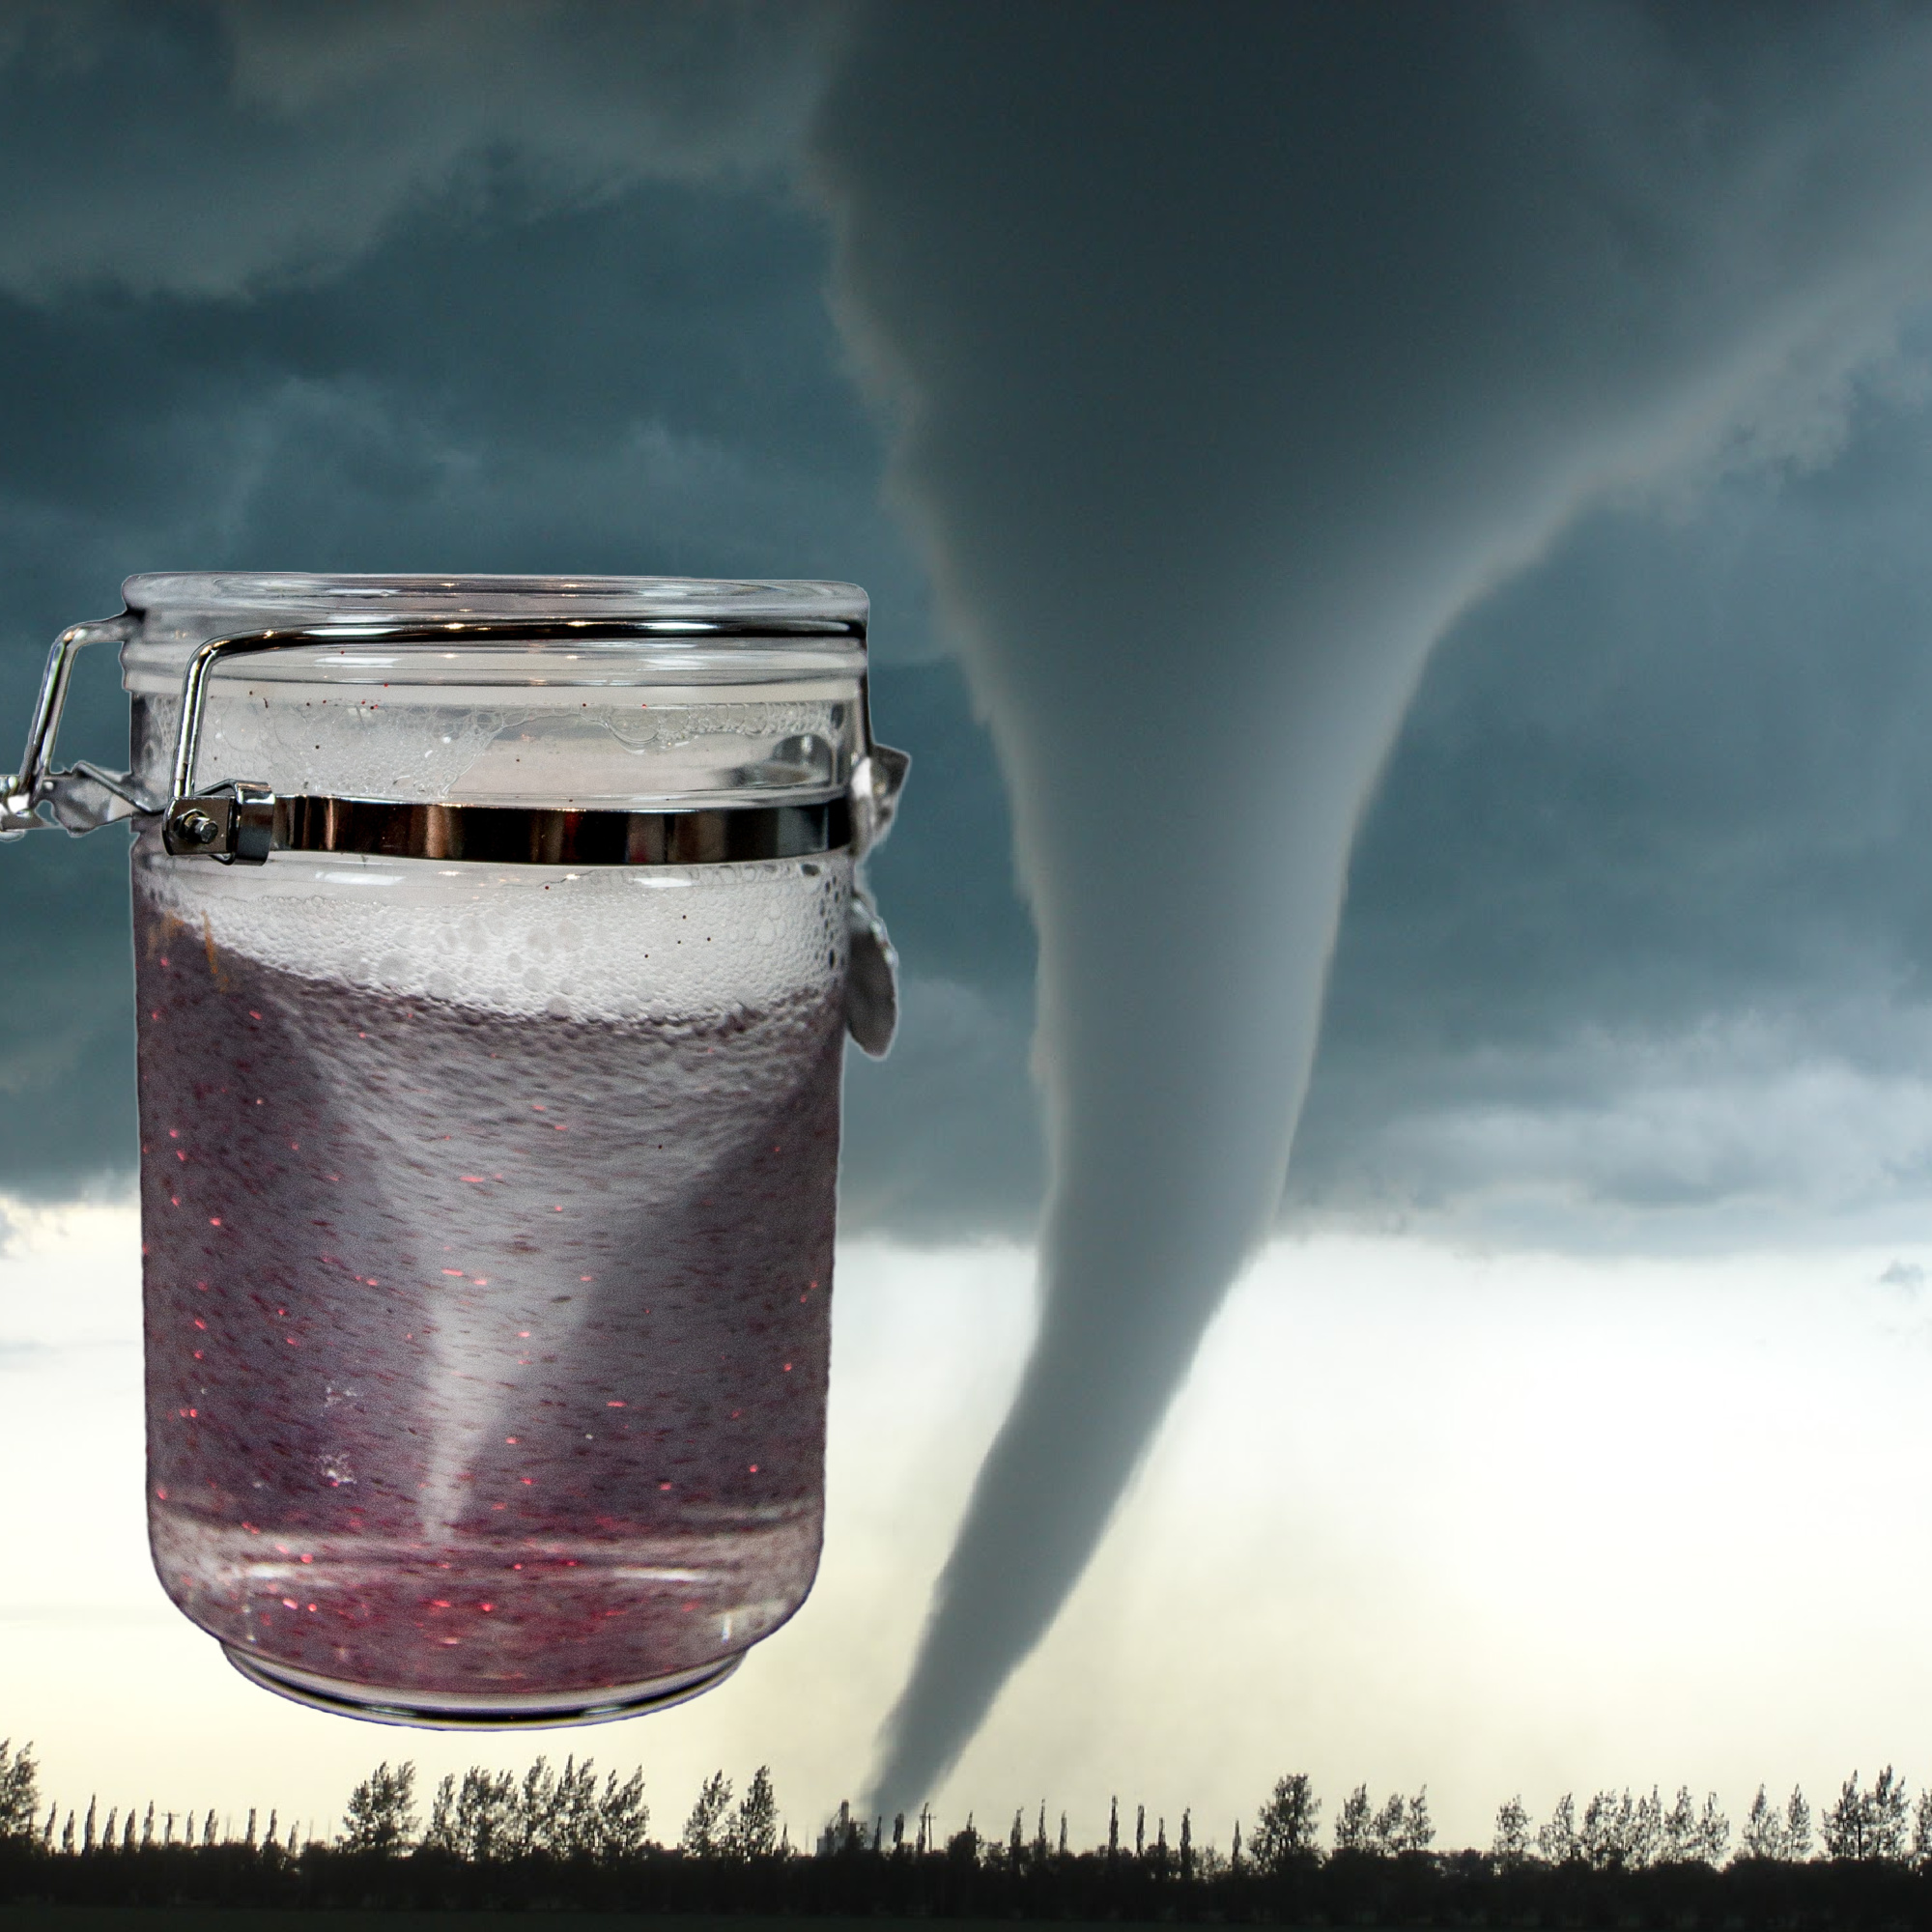 What is a Tornado? - Science Questions